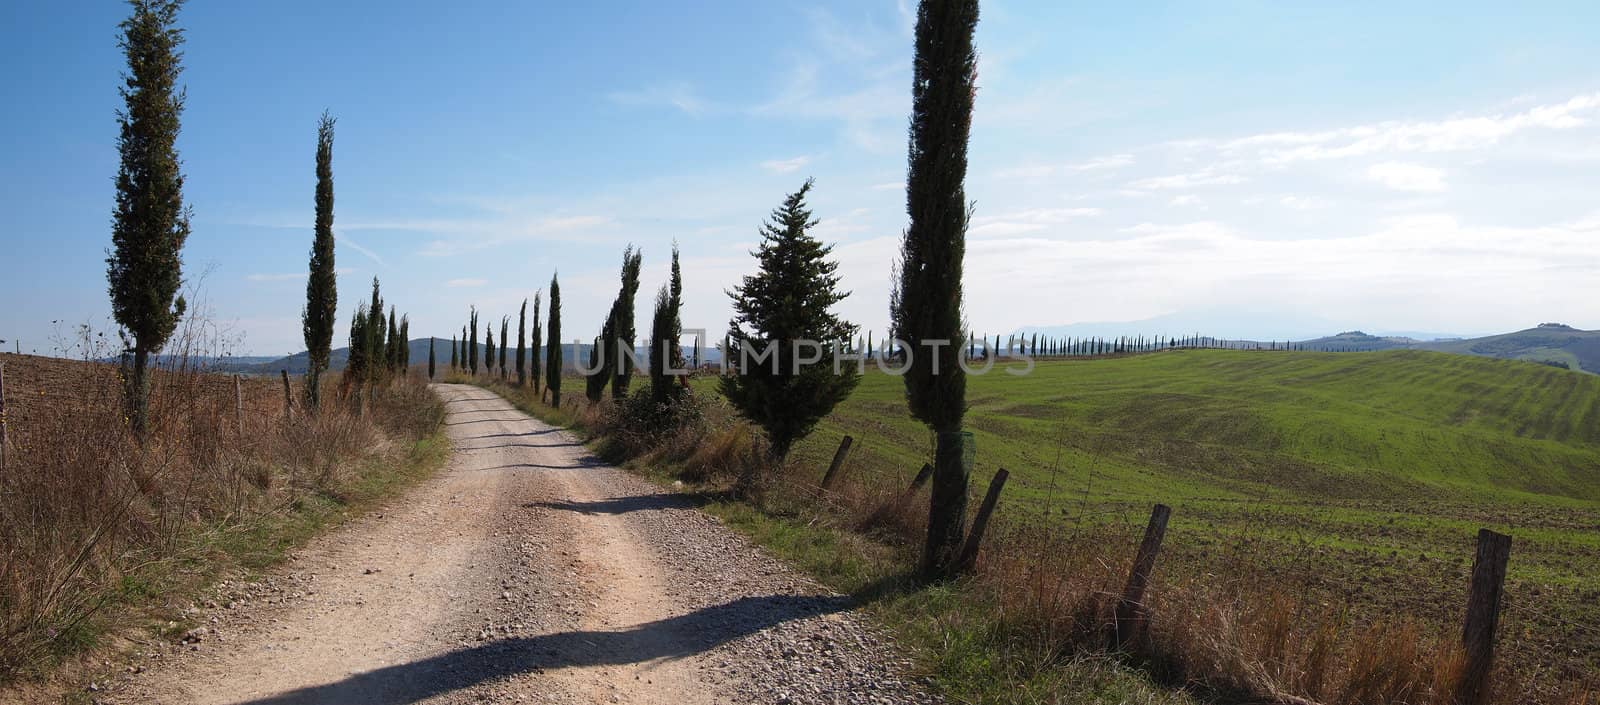 Cypress lined white road in a rural part of Tuscany in the Val d�Orcia.